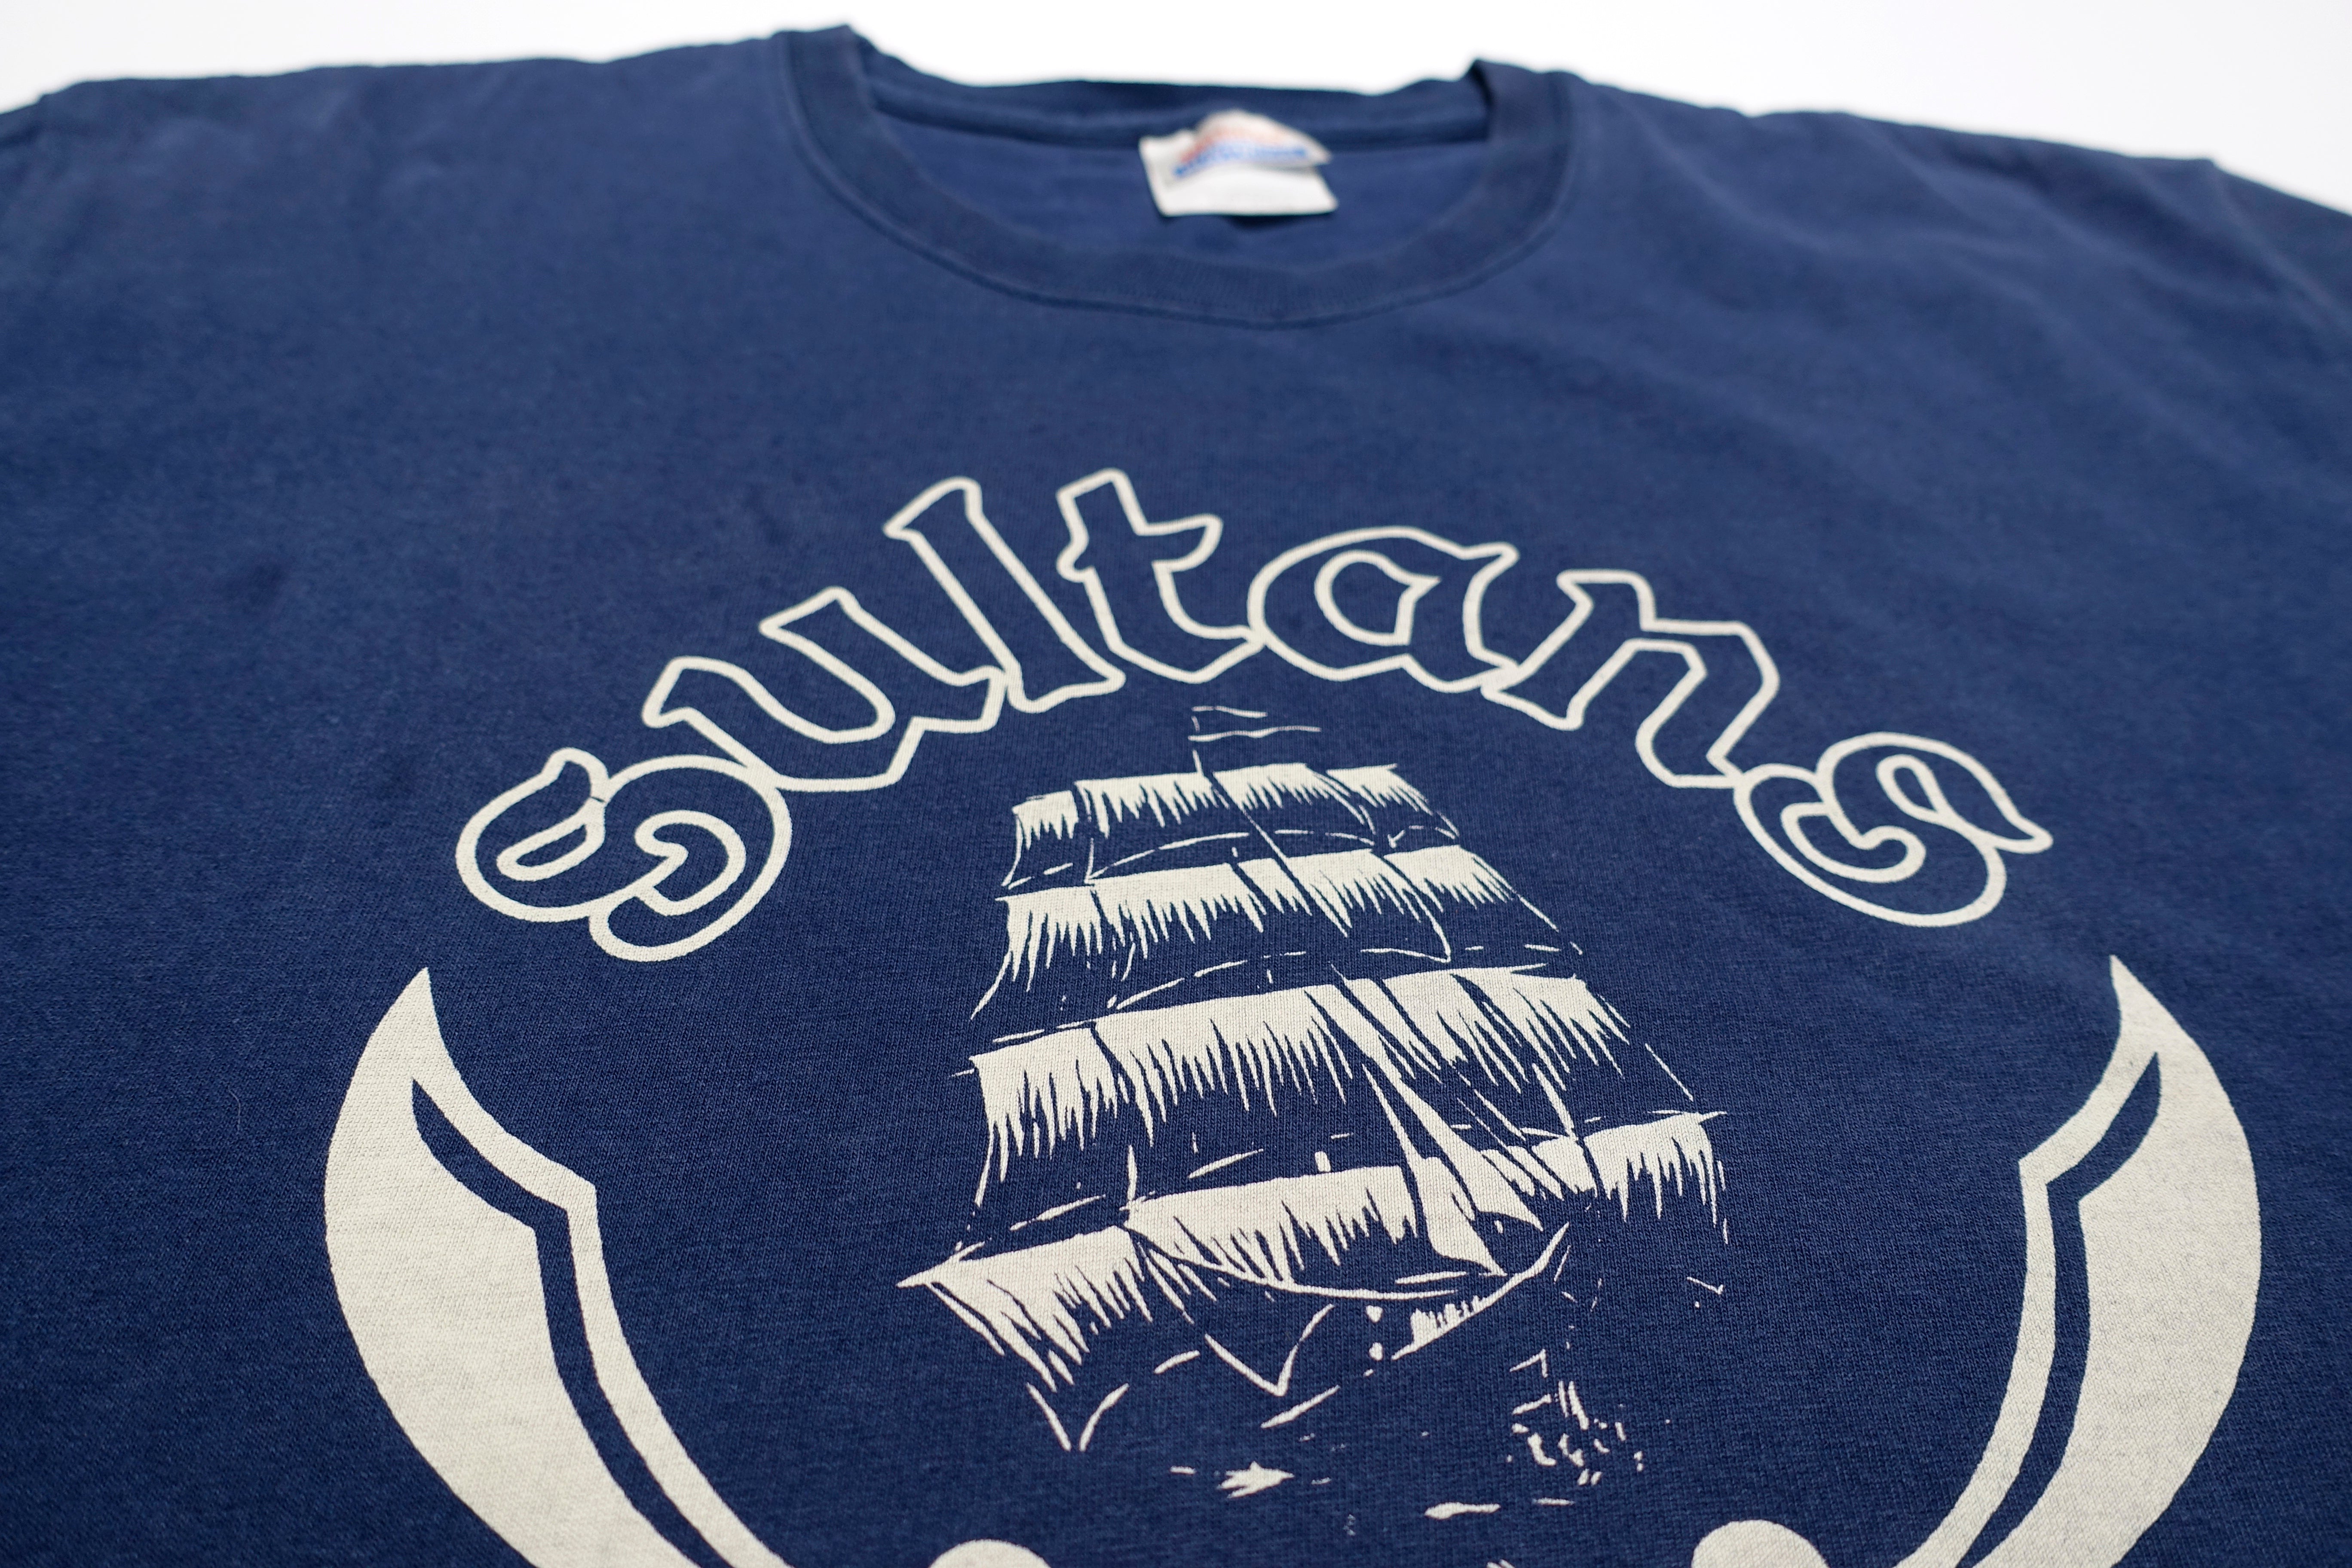 Sultans - Ghost Ship 2000 Tour Shirt Size Large